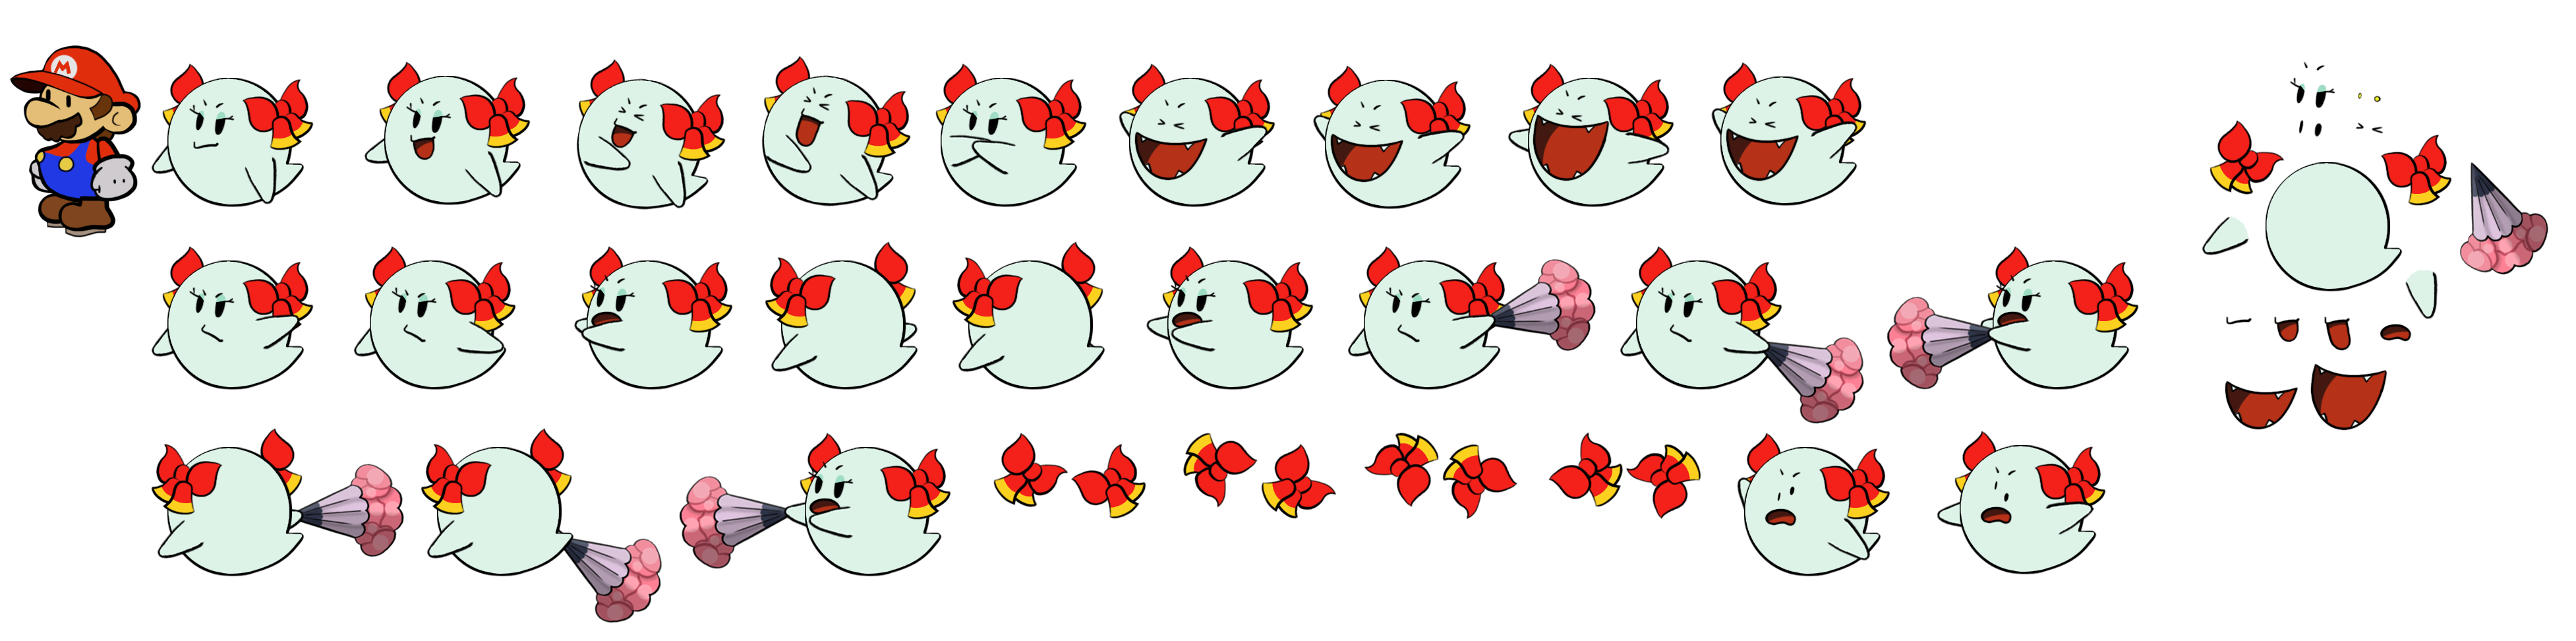 Bow (Paper Mario-Style)